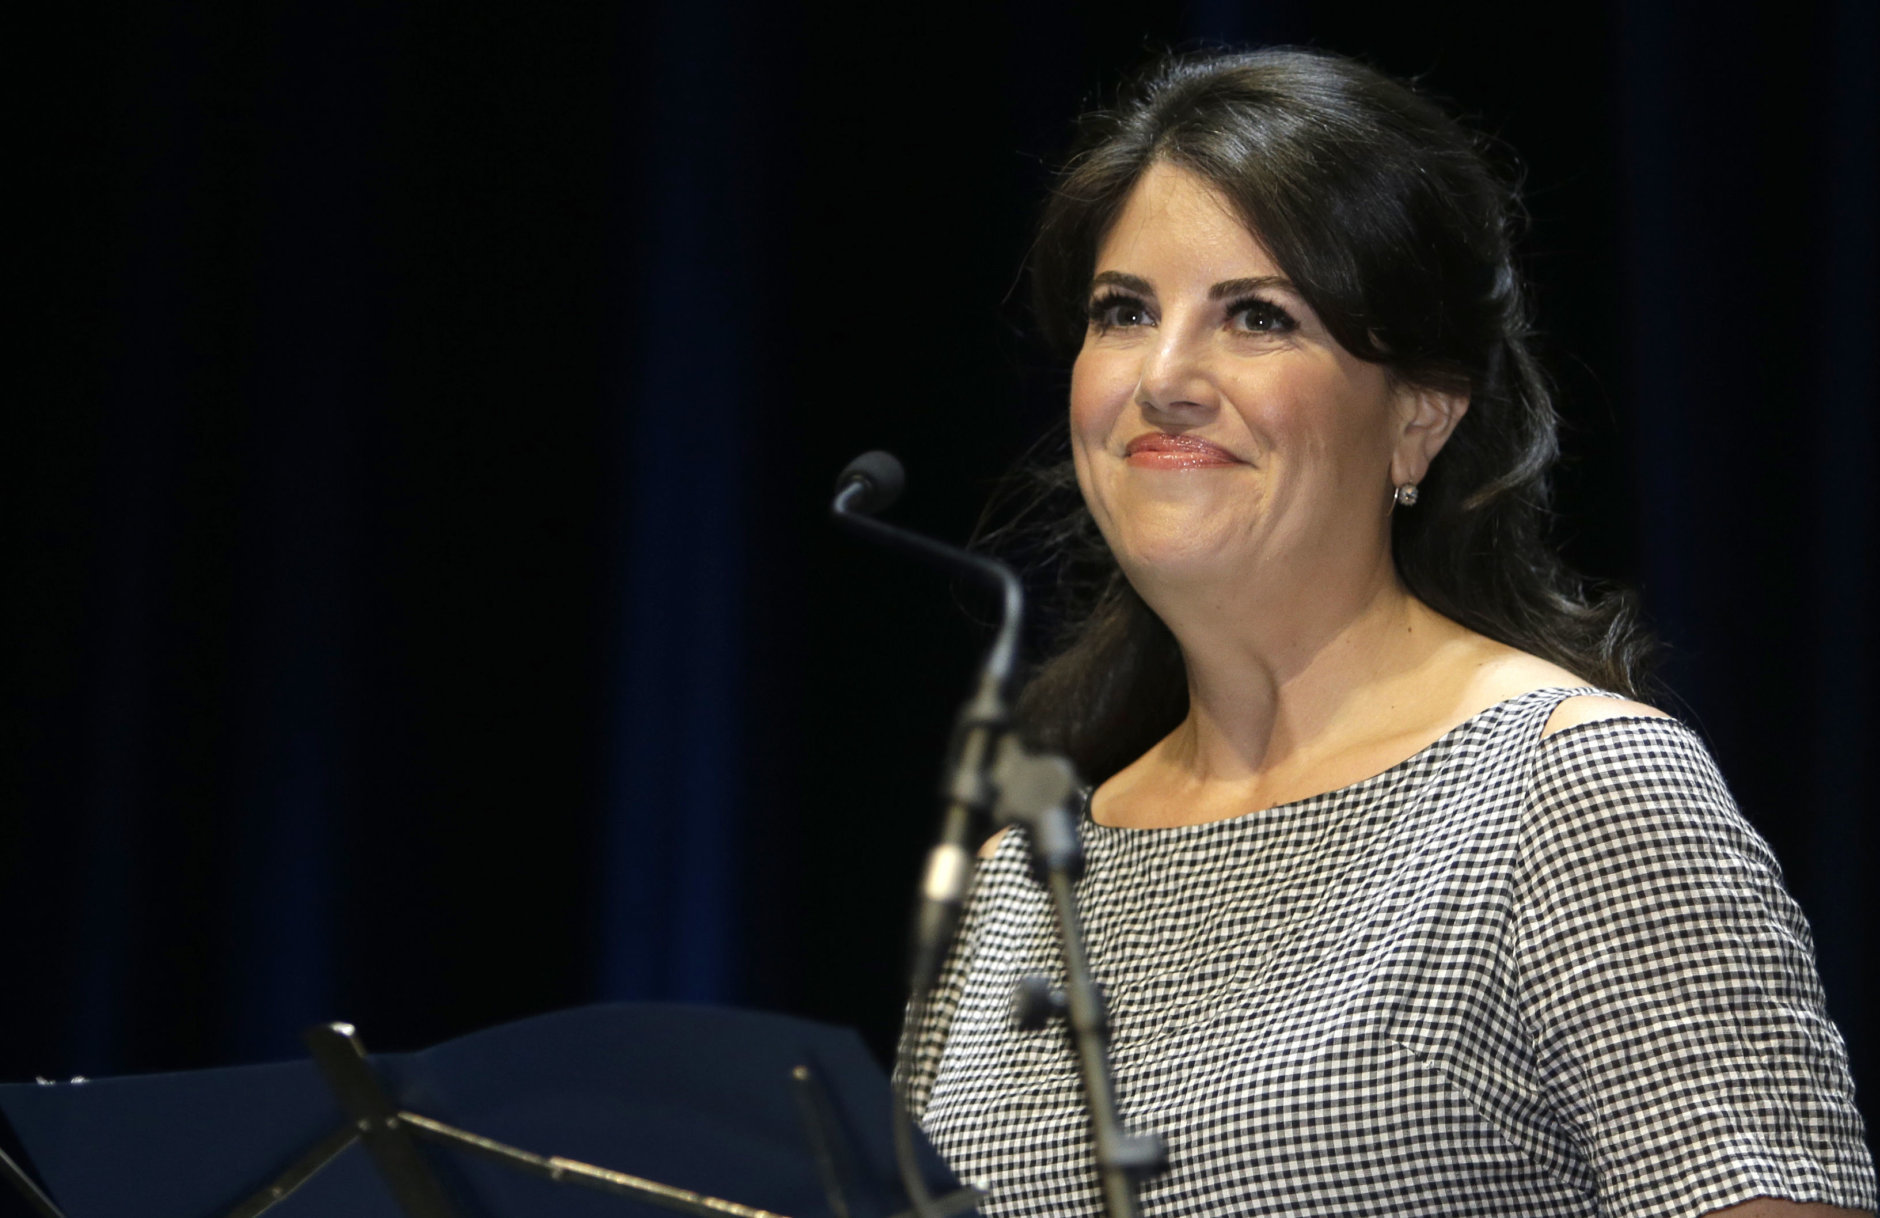 US former White house intern Monica Lewinsky attends at the Cannes Lions 2015, International Advertising Festival in Cannes, southern France, Thursday, June 25, 2015. The Cannes Lions International Advertising Festival is a world's meeting place for professionals in the communications industry.(AP Photo/Lionel Cironneau)